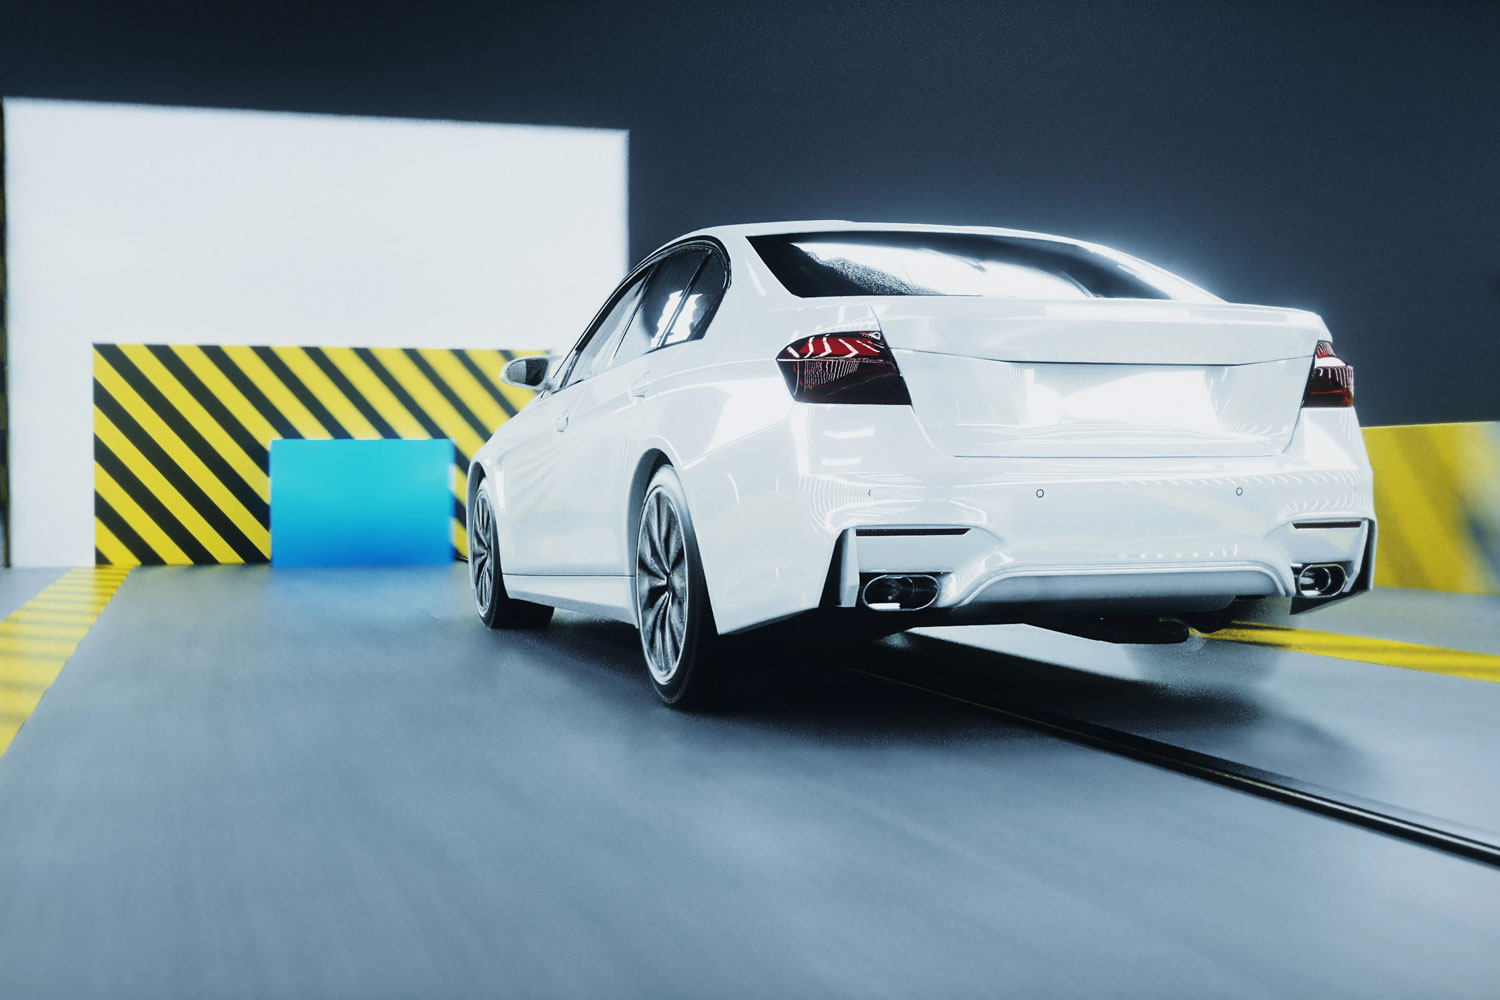 White car in a safety crash test experiment